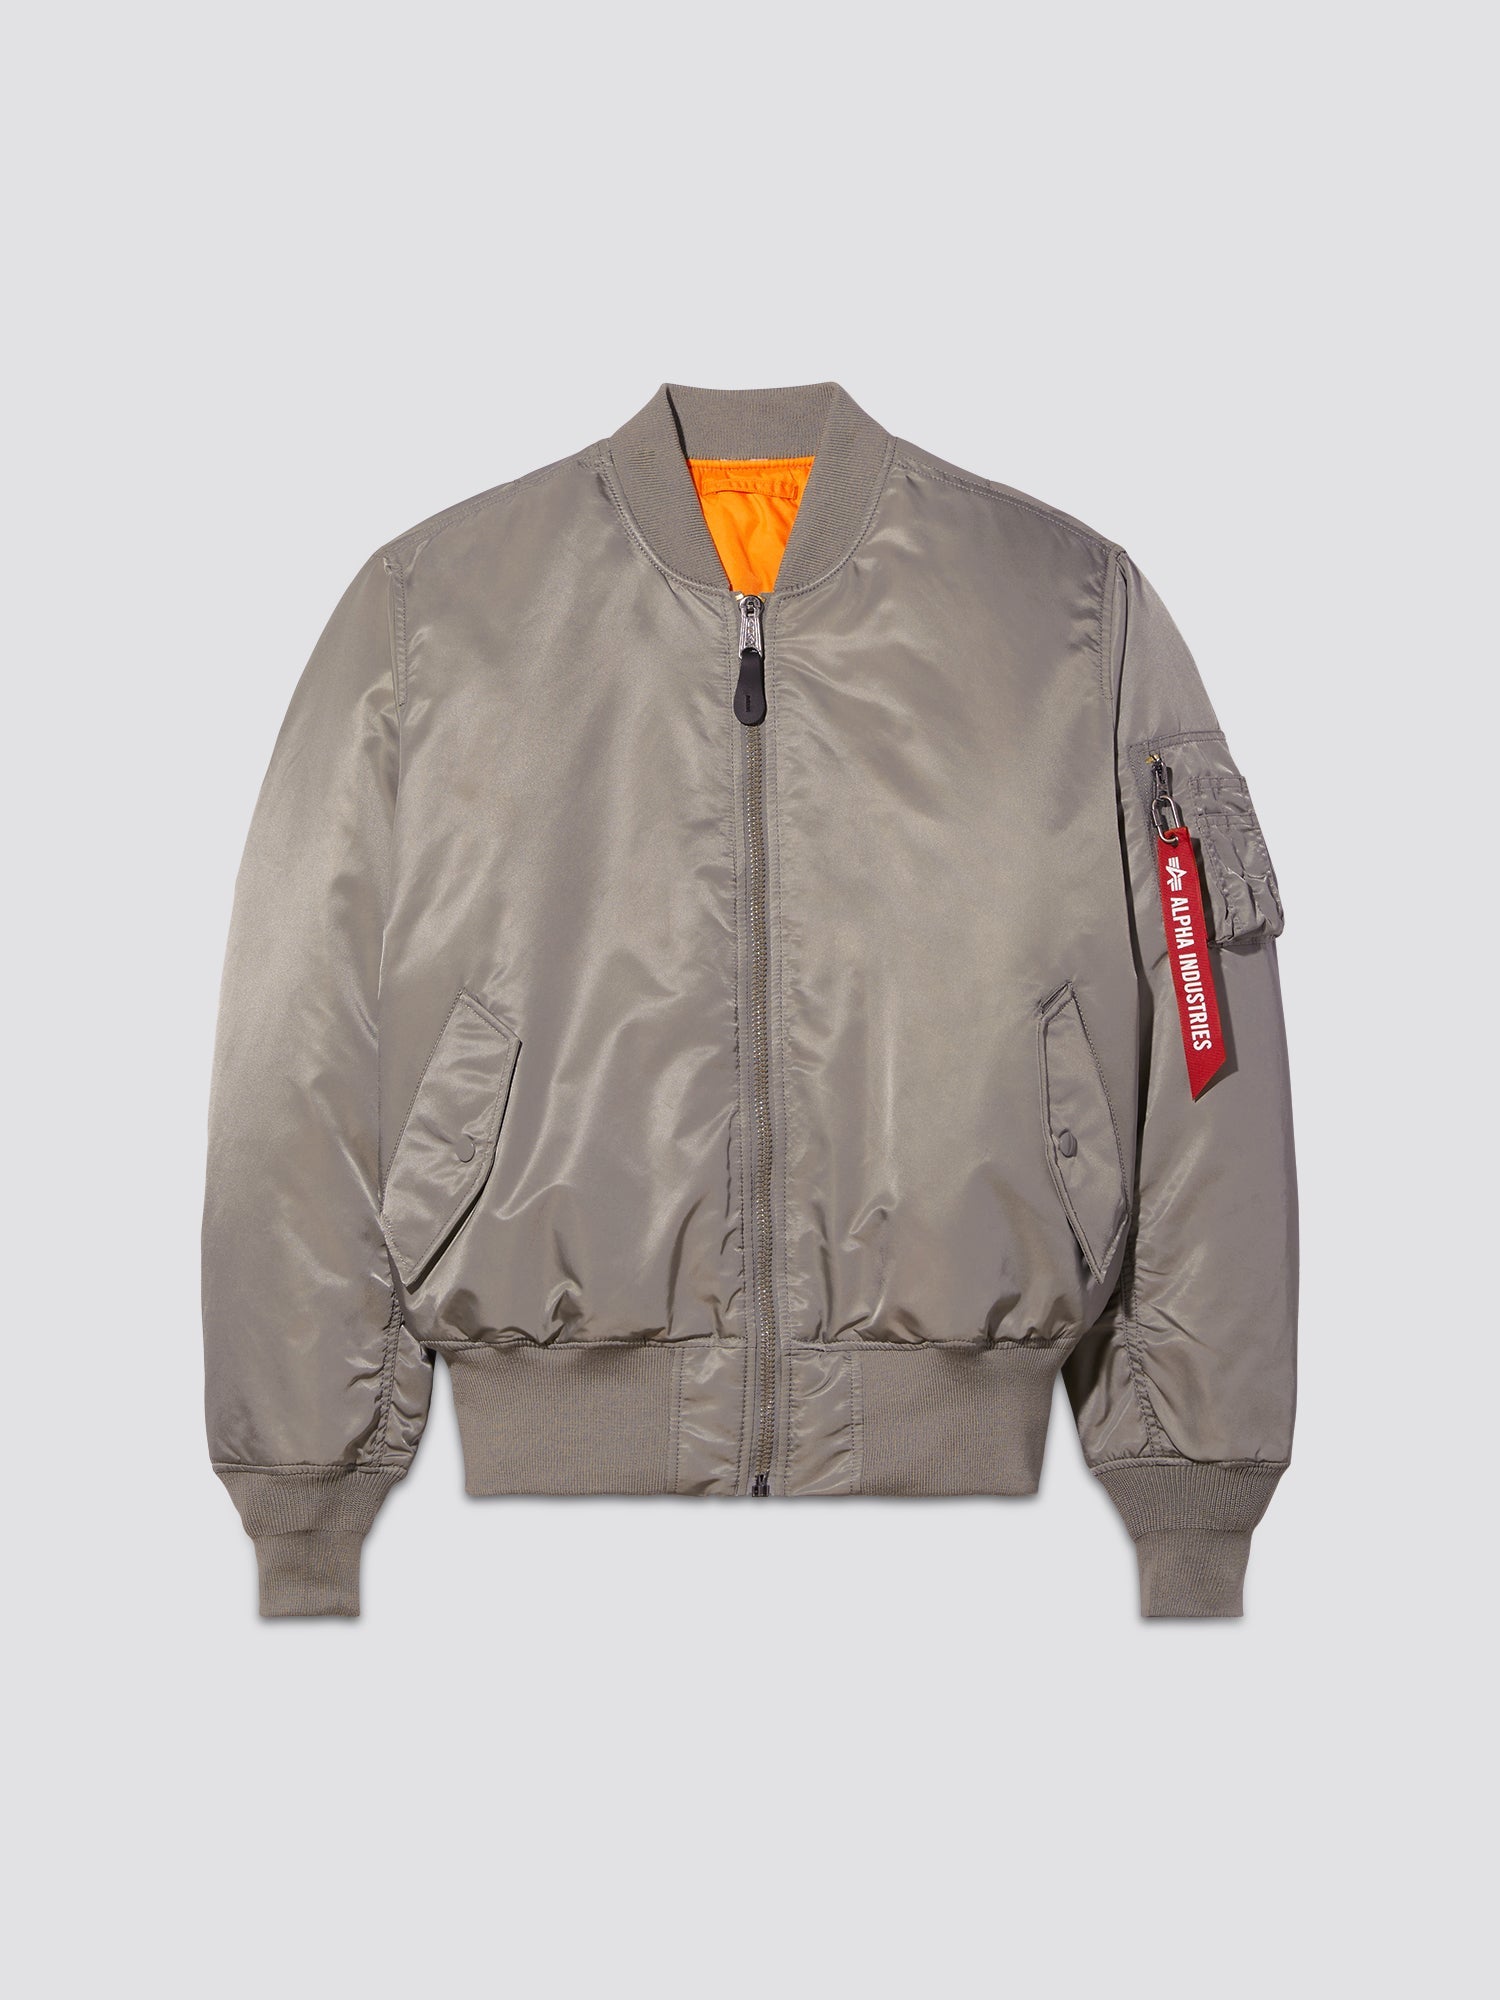 MA-1 BOMBER JACKET (HERITAGE) OUTERWEAR Alpha Industries VINTAGE GRAY XS 